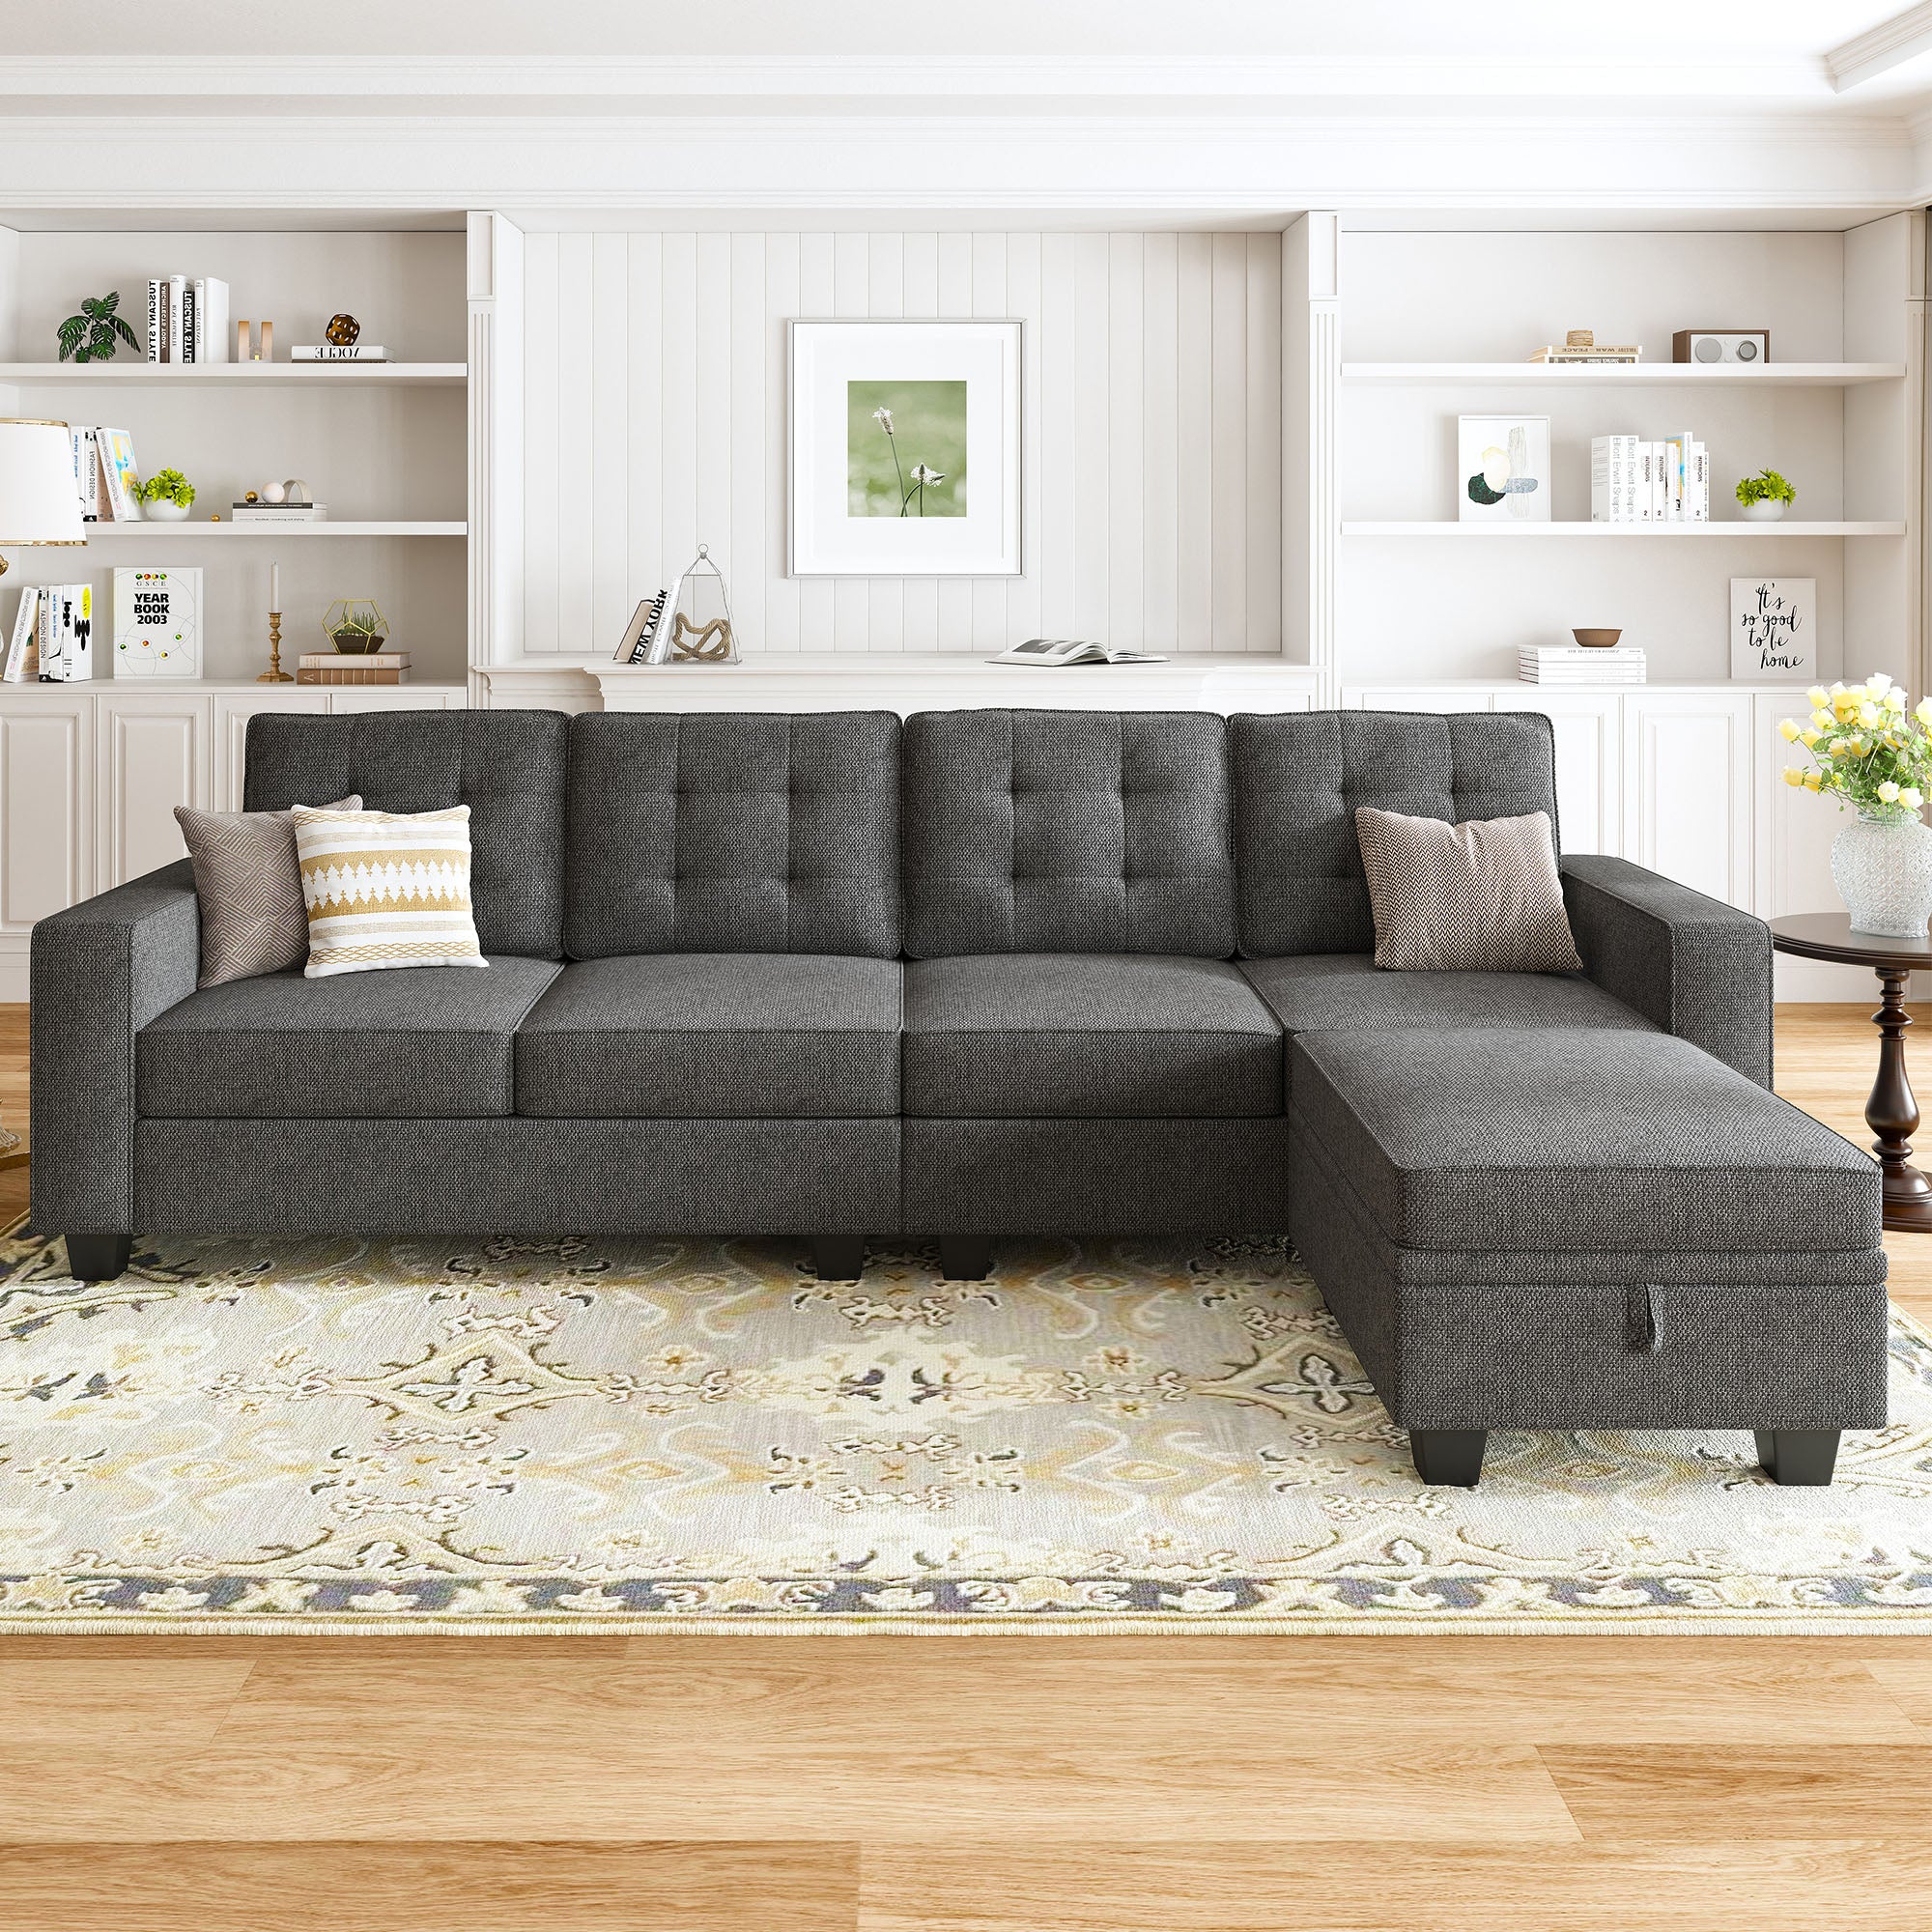 HONBAY 5-Piece Linen Convertible Sectional With Storage Ottoman